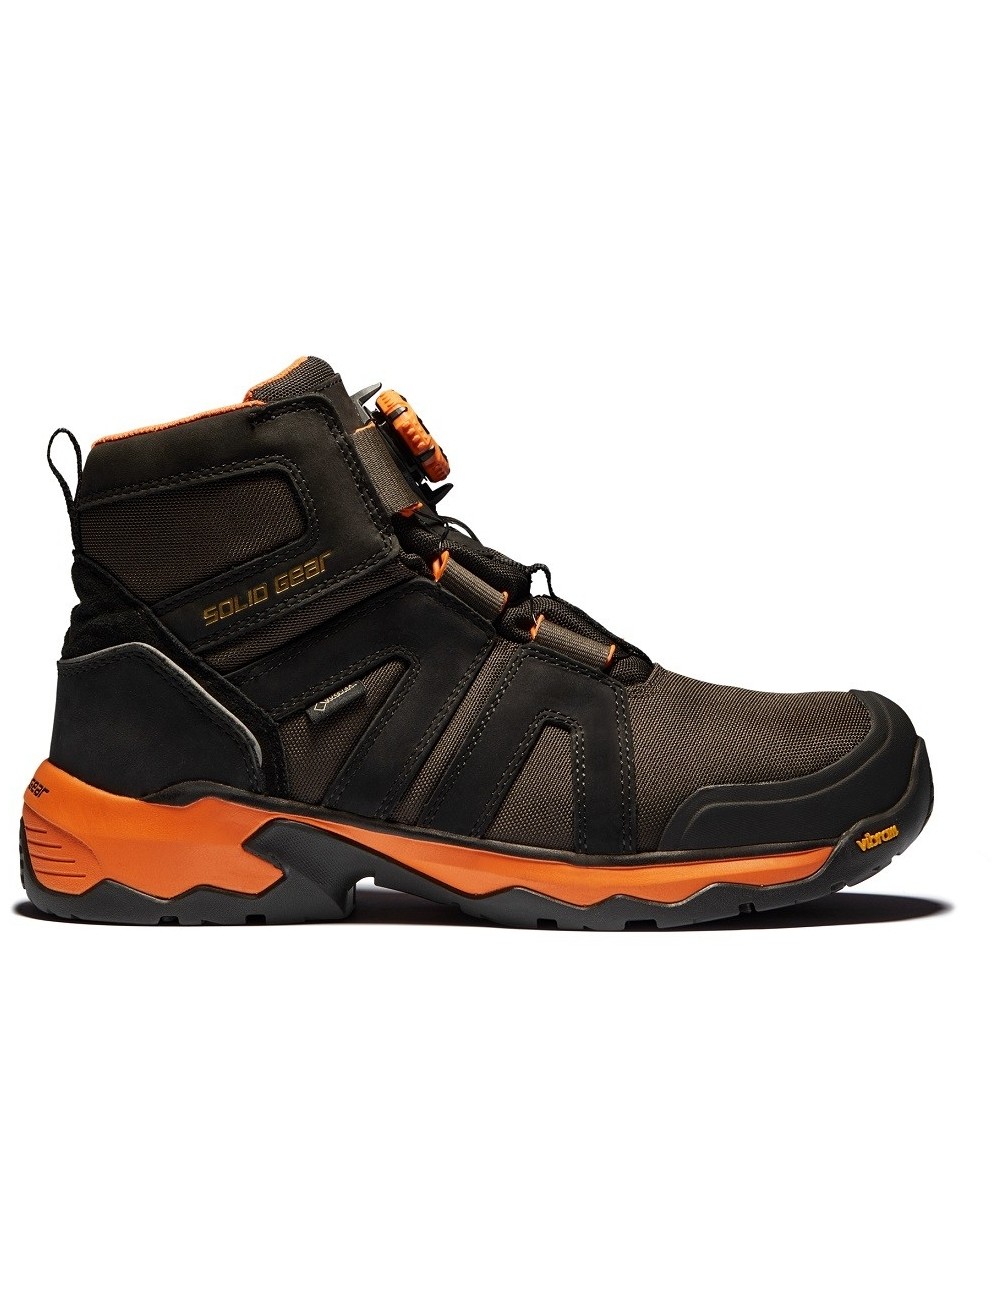 Work boots Solid Gear Tigris GTX AG Mid S3 WR SRC